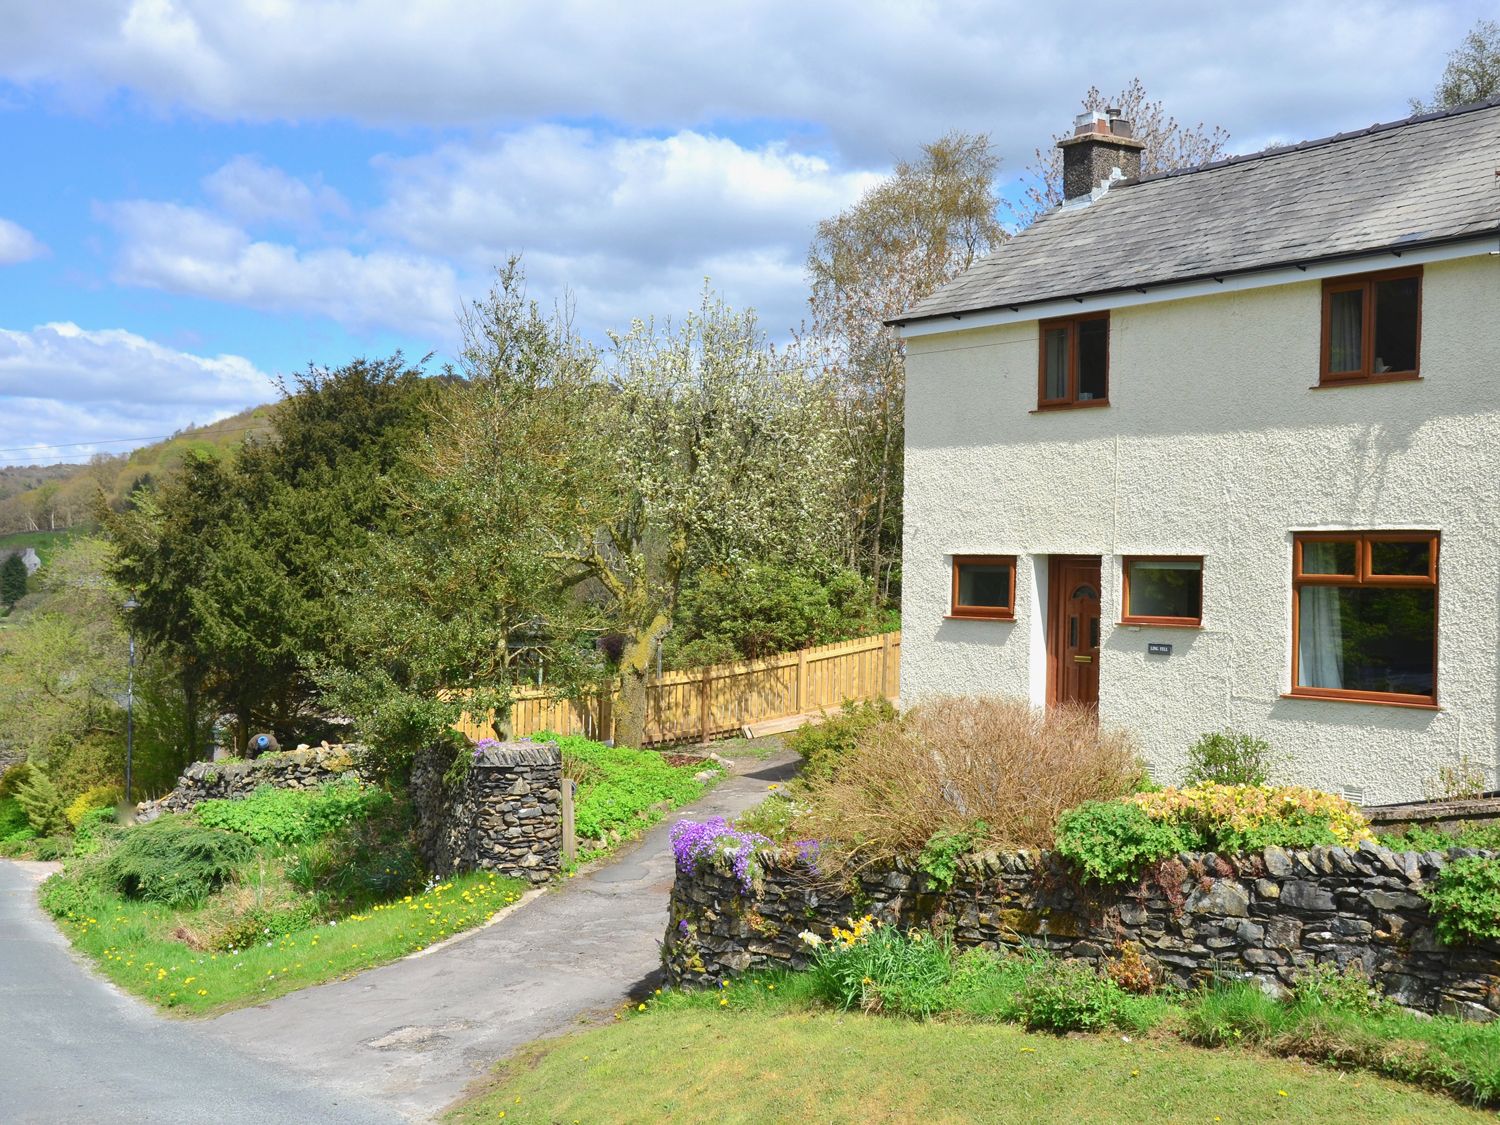 Ling Fell Cottage - Lake District - 971558 - photo 1